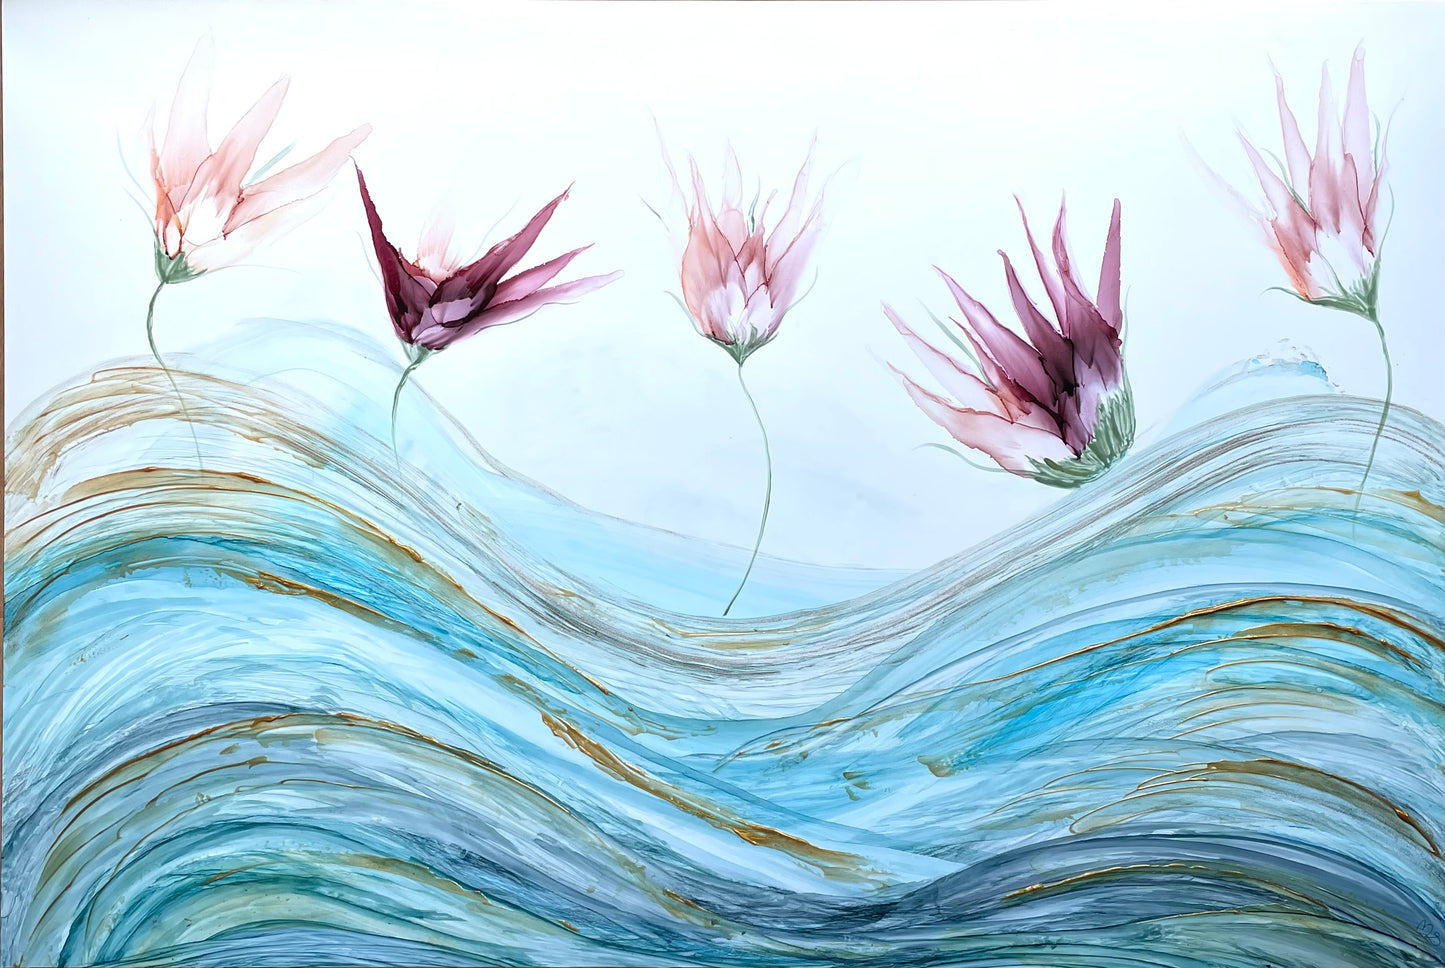 Ethereal Waves | Large floral alcohol ink artwork with waves and pink and purple flowers.